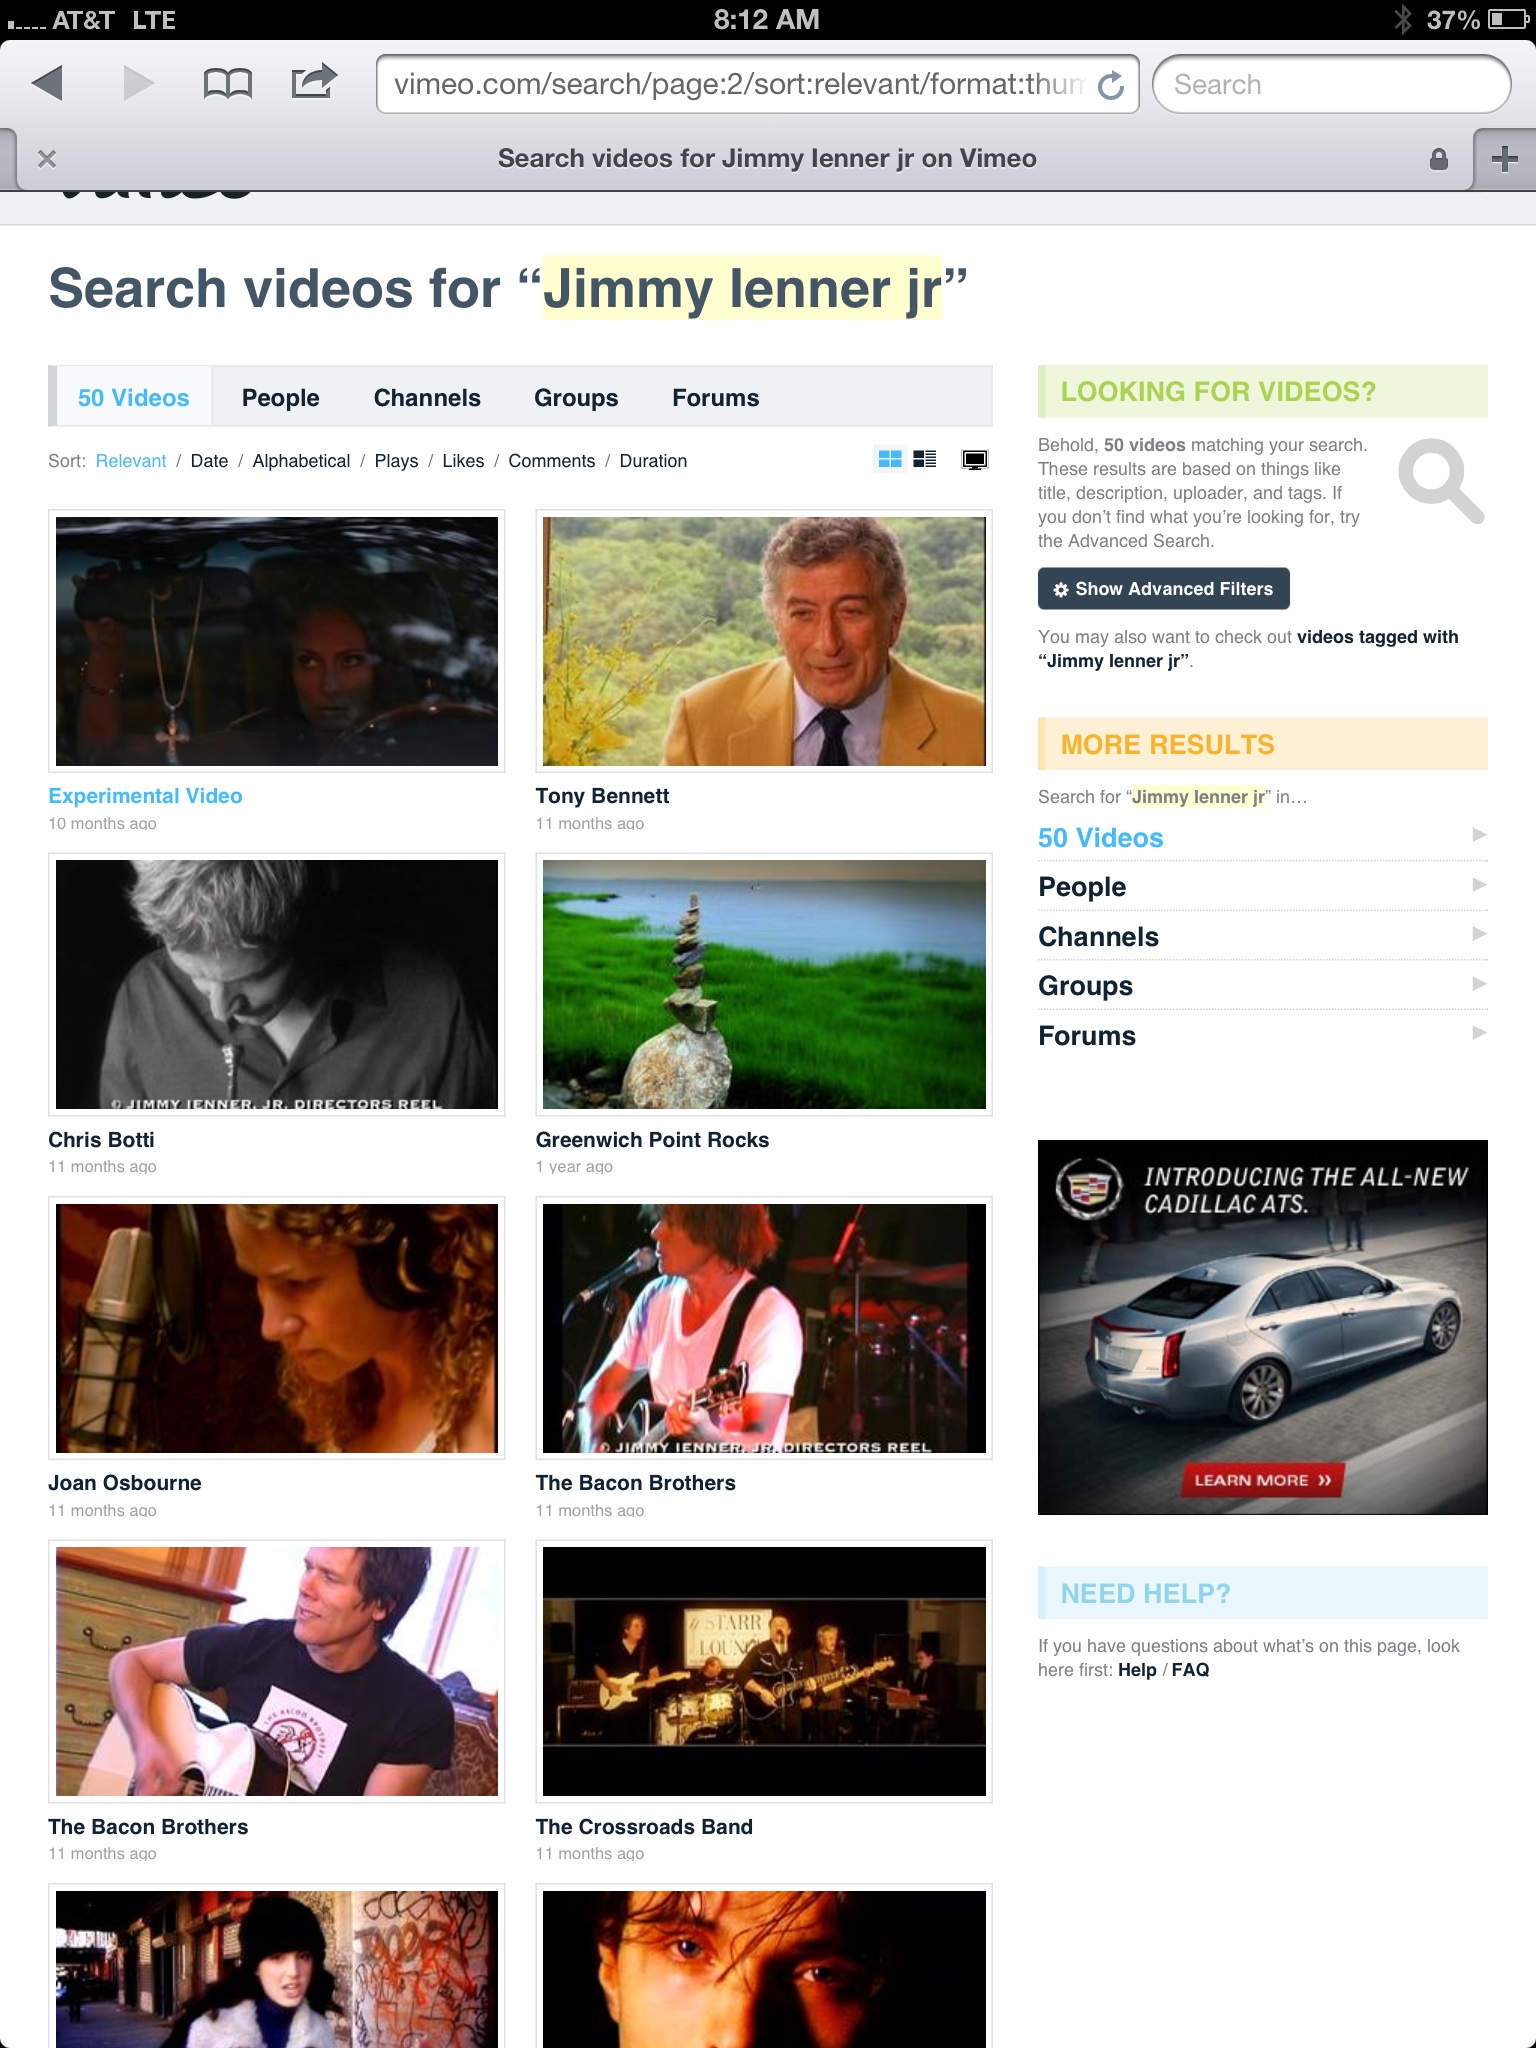 Screen shot of Jimmy Ienner Jr's Vimeo page